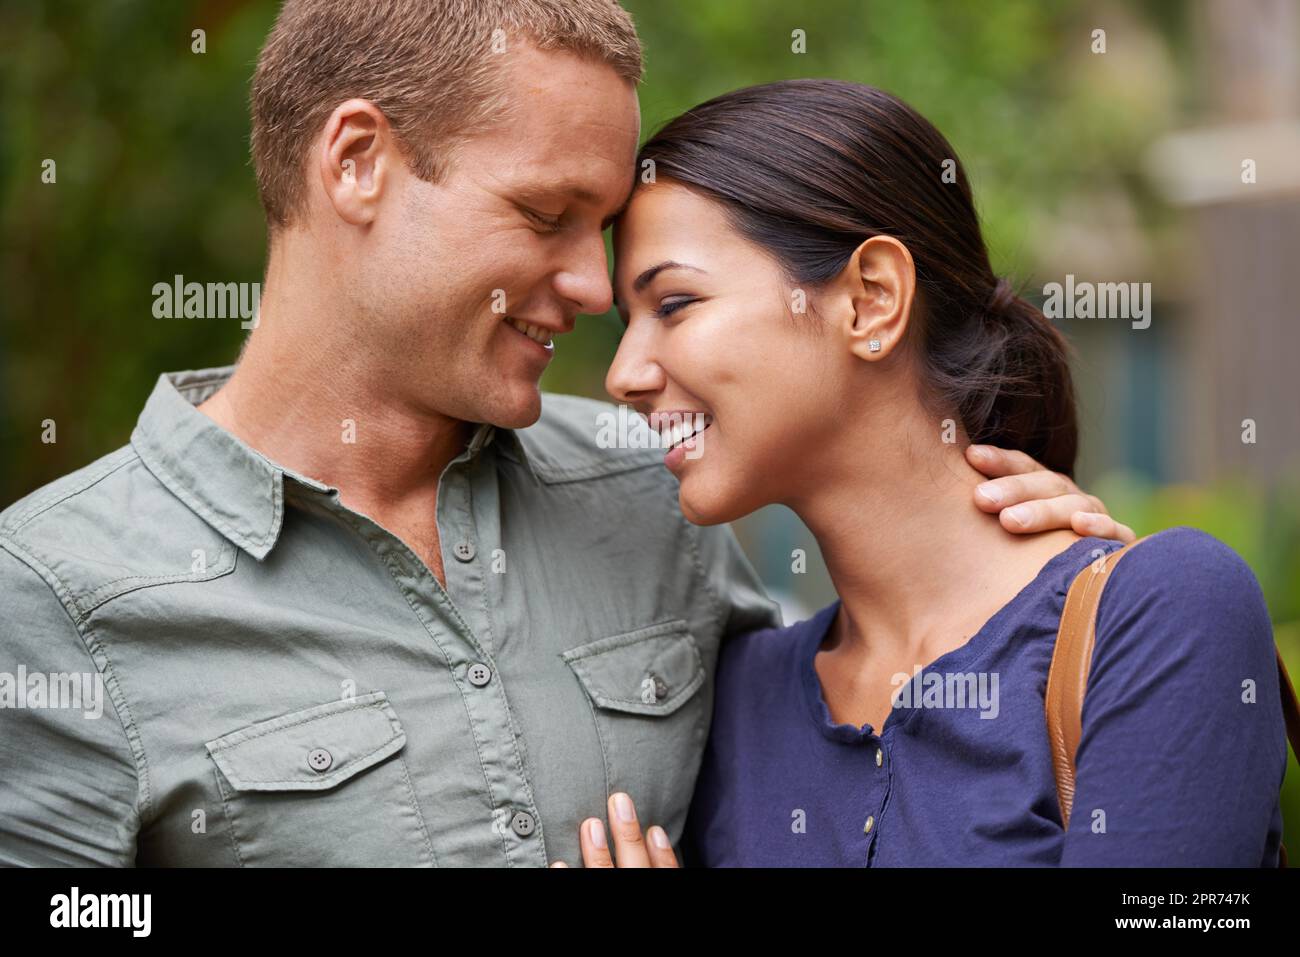 Lost in the haze of springtime romance. Cropped view of a happy young couple standing together out in the park. Stock Photo